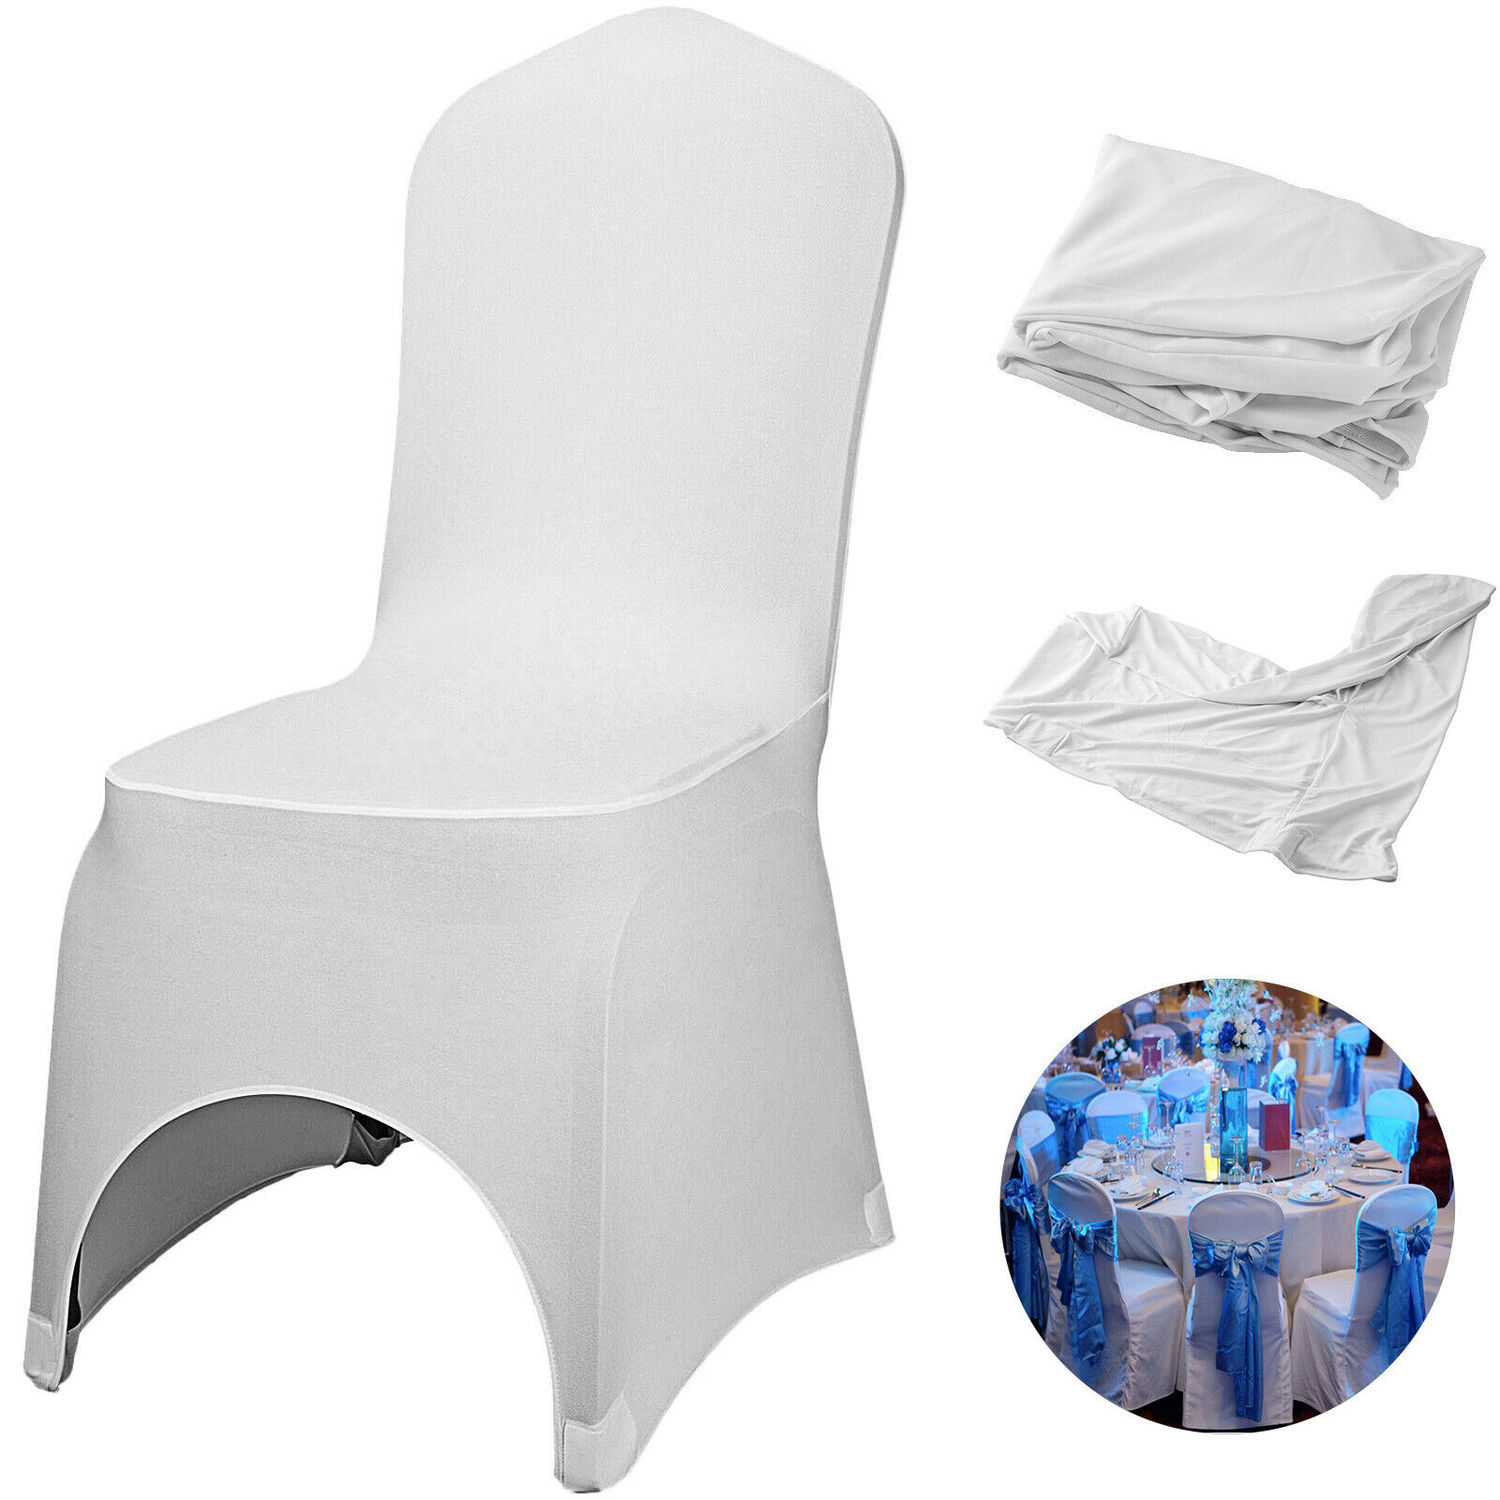 

VEVOR White Chair Covers 100PCS Stretch Polyester Spandex Slipcovers for Banquet Dining Party Wedding Decorations Y200103